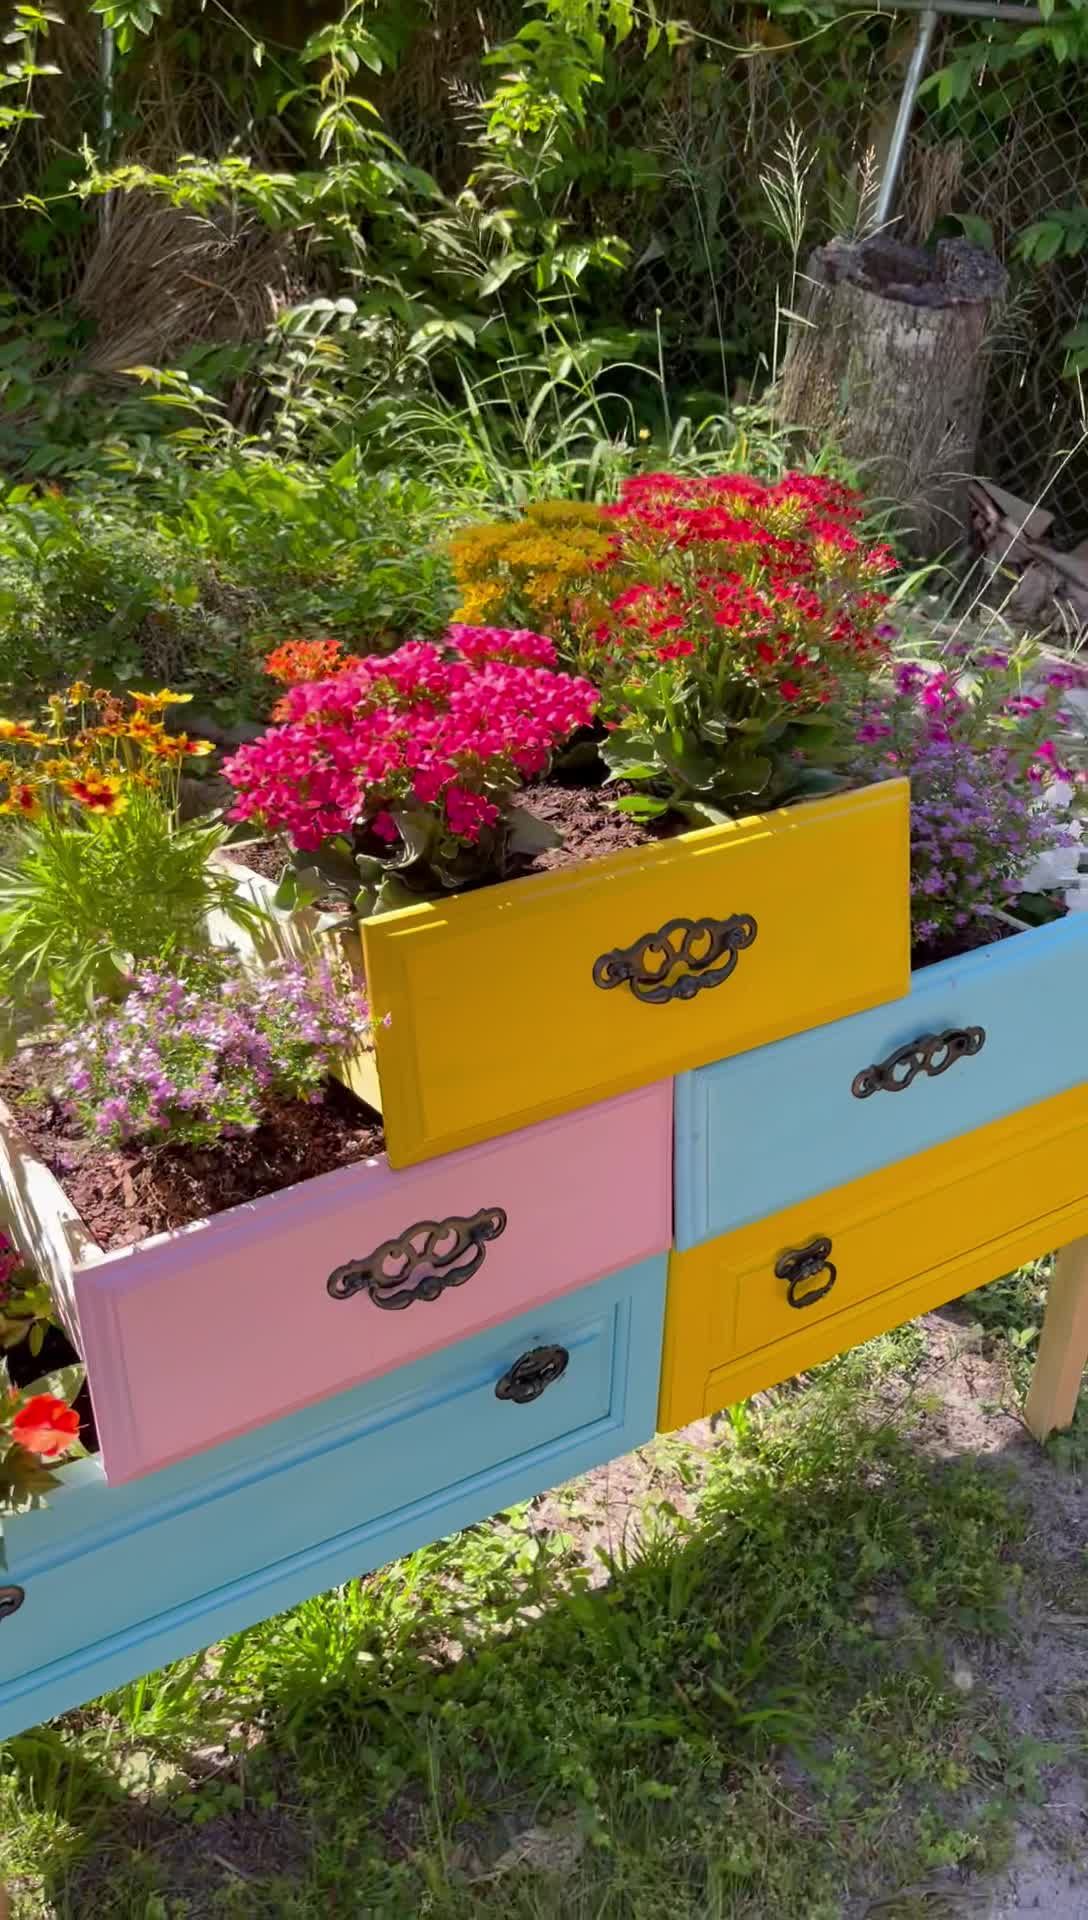 A Rustic and Charming Garden Planter Made from a Chest of Drawers